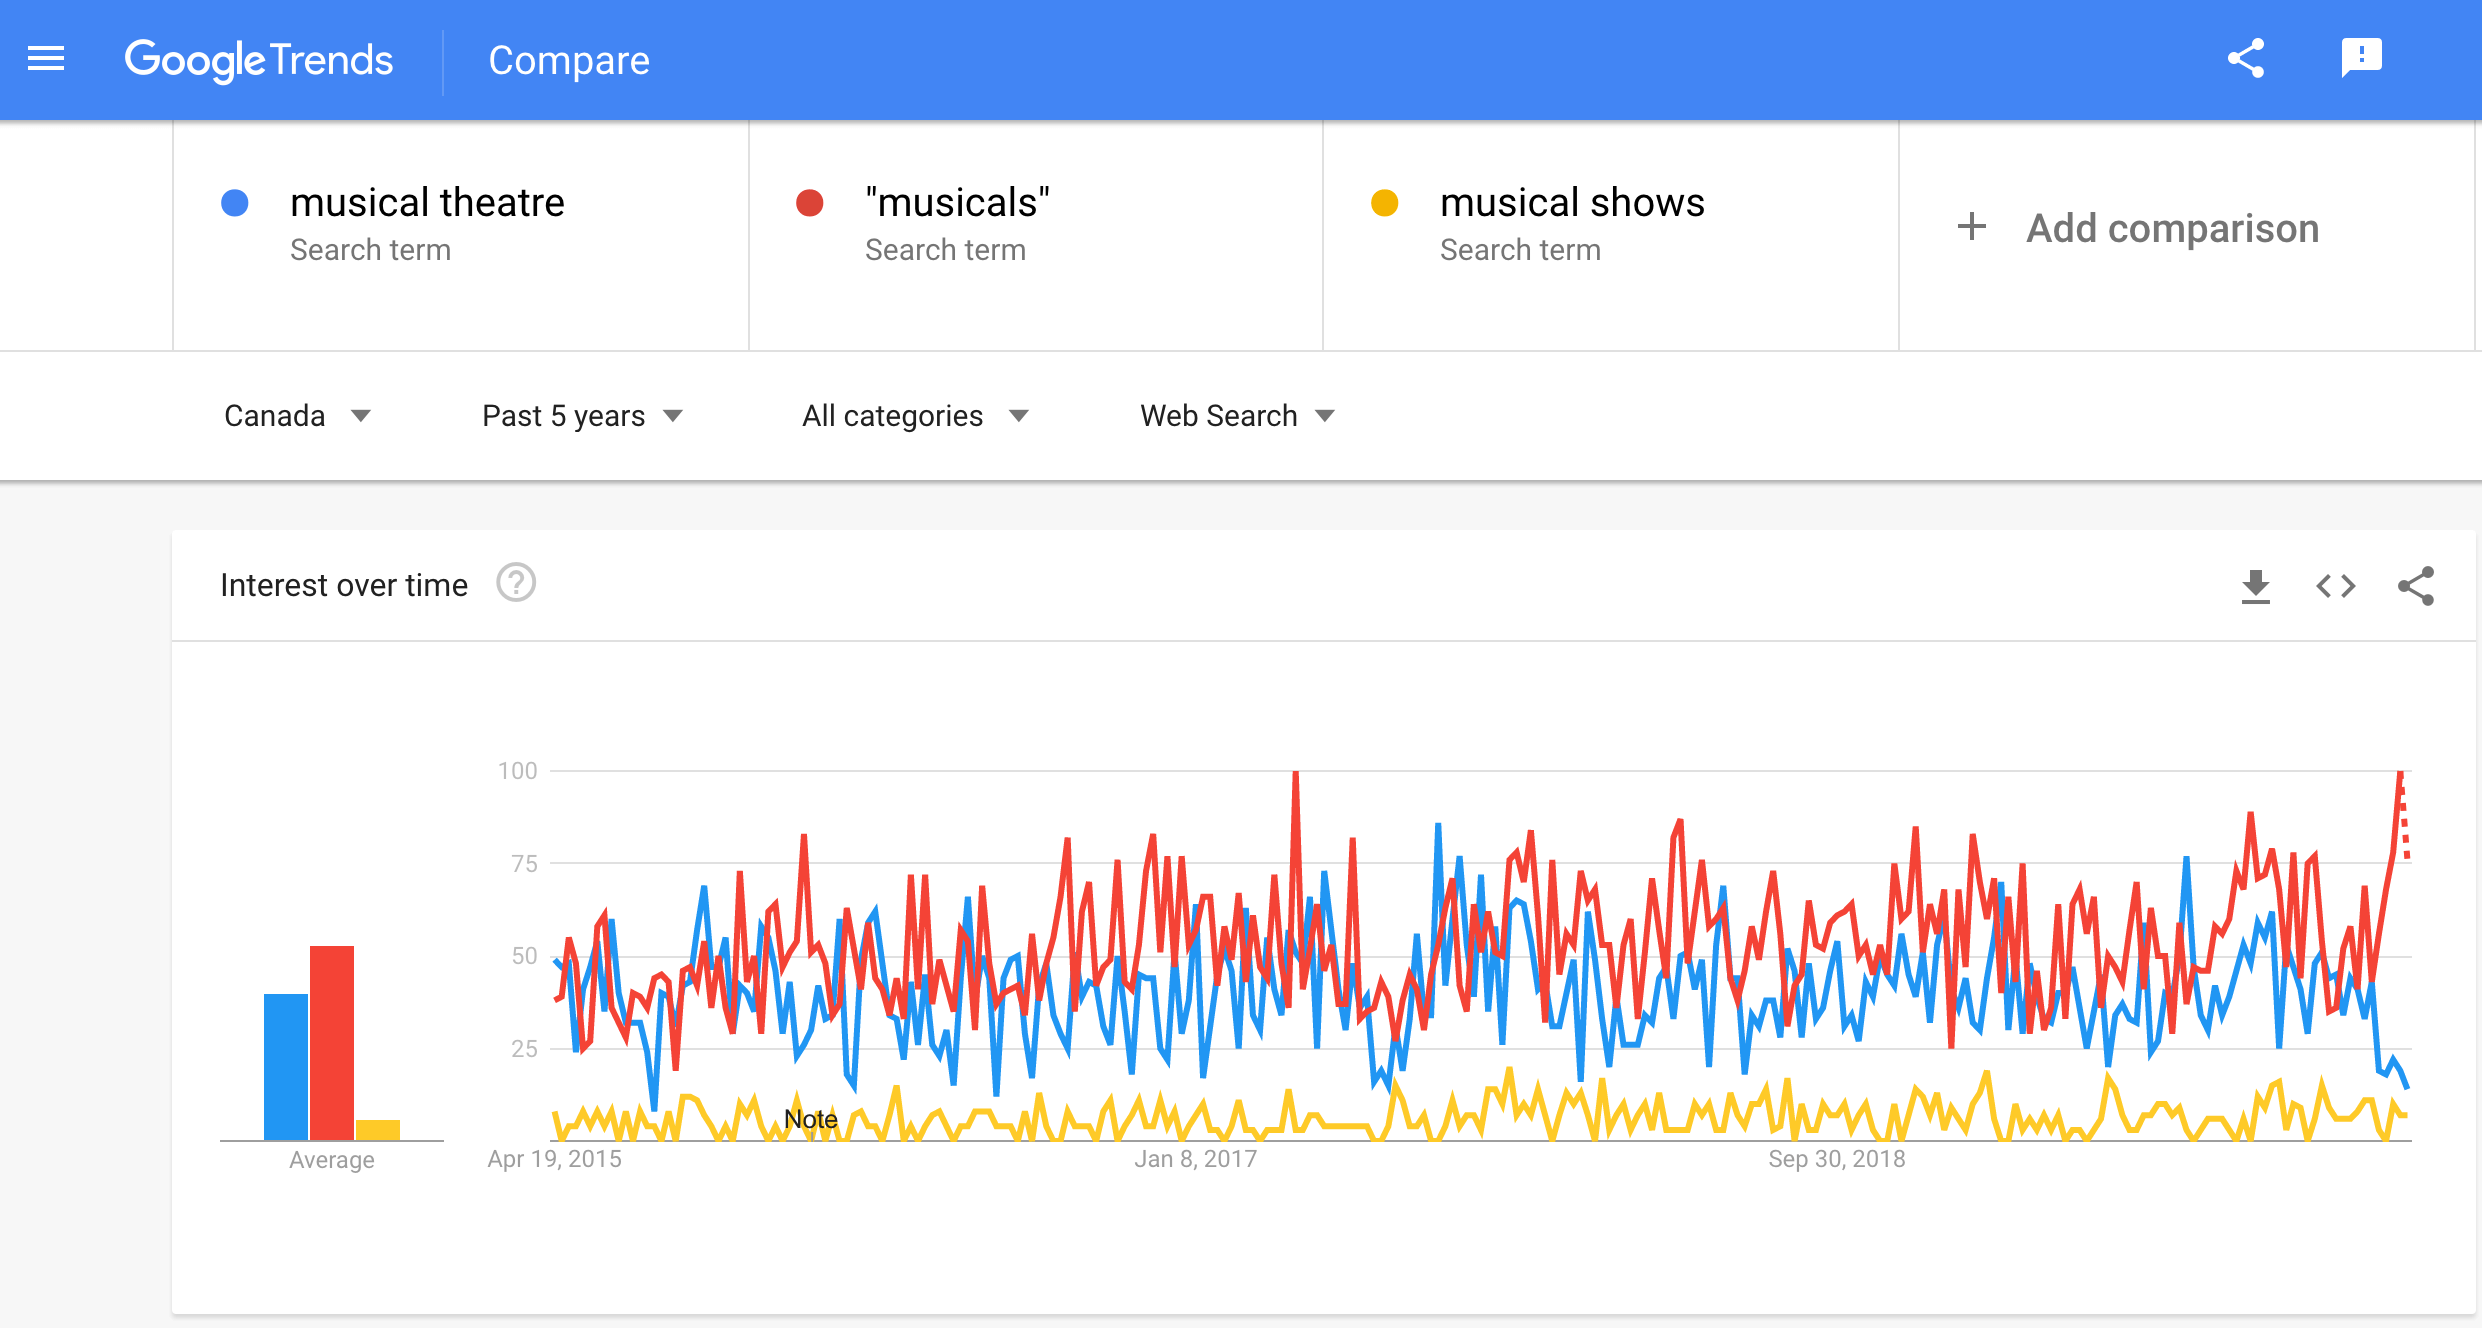 Google trends results for different queries related to musical theatre